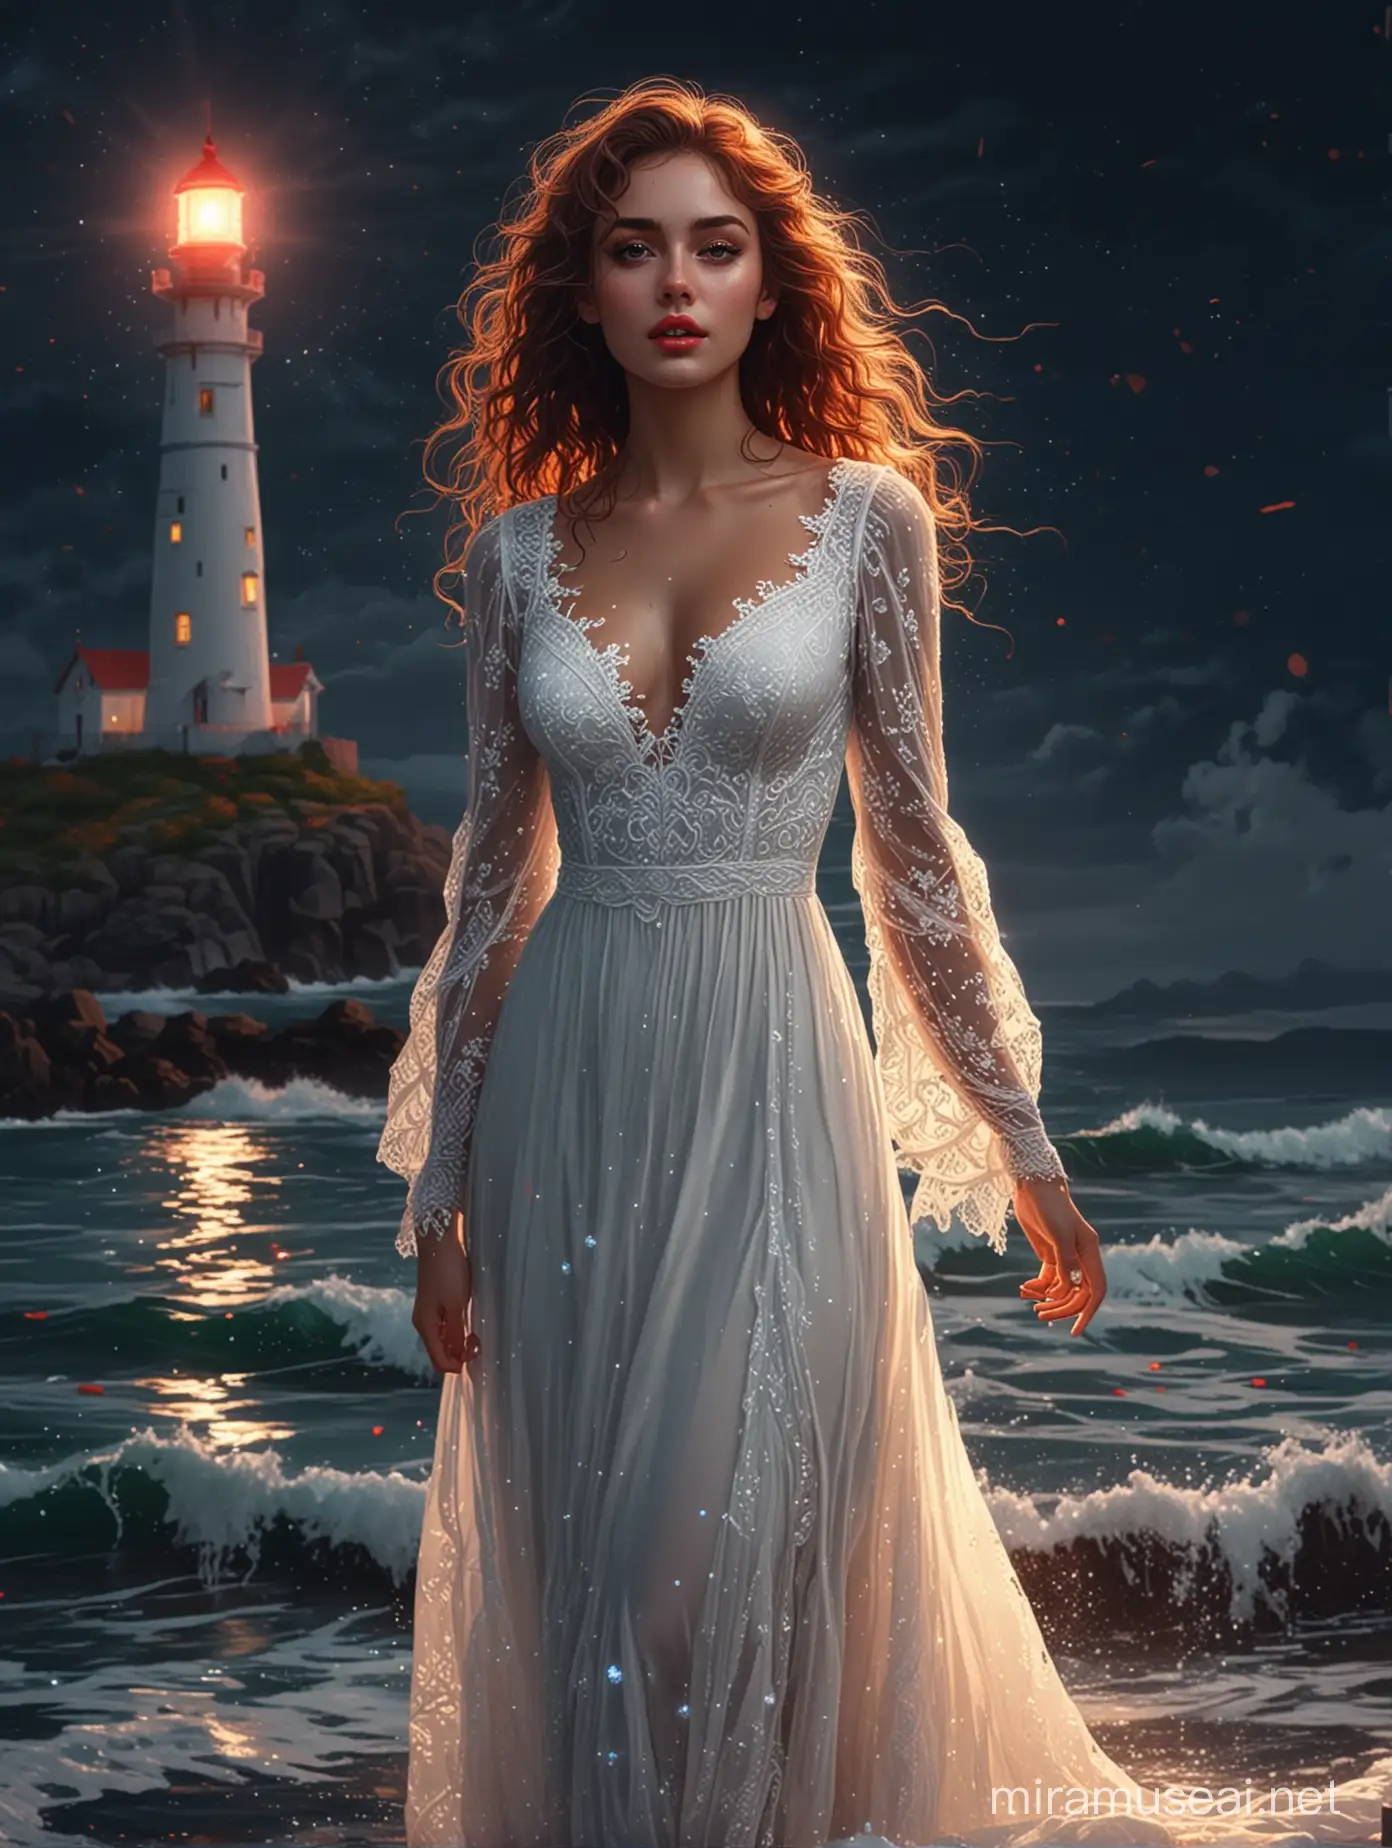 Glamorous Woman Fading Into Neon Waters by Lighthouse